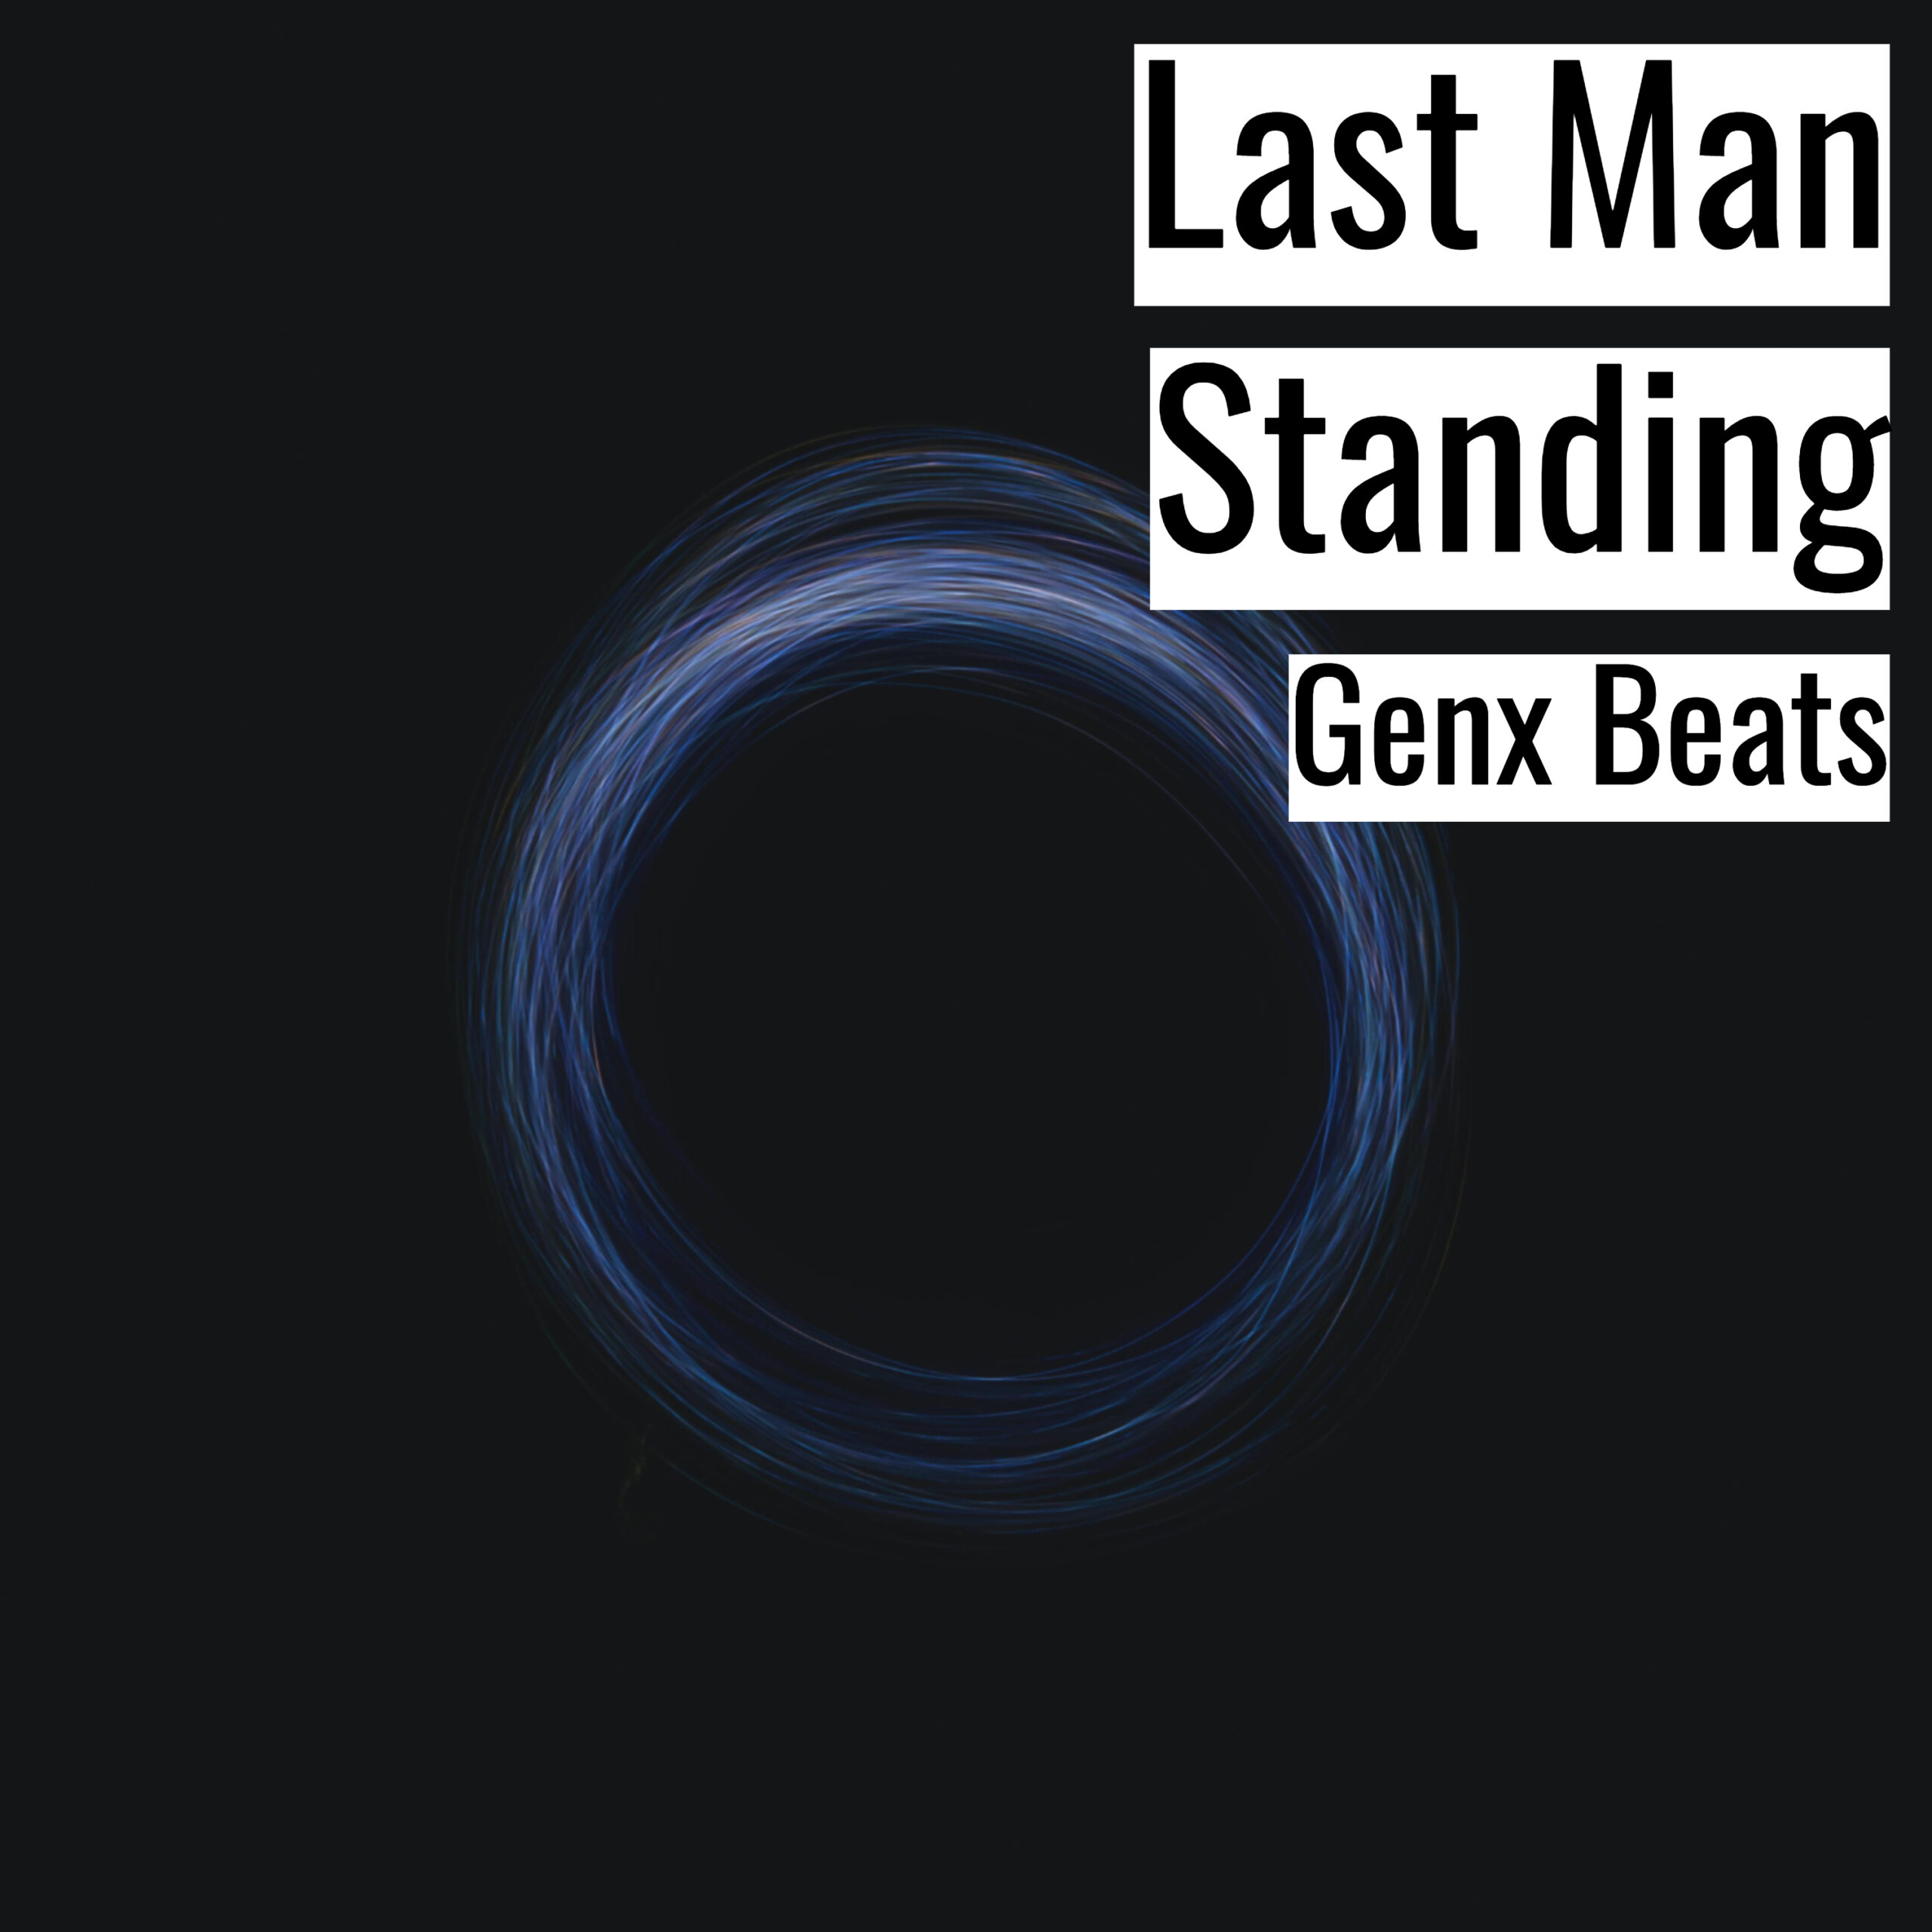 Last Man Standing scaled